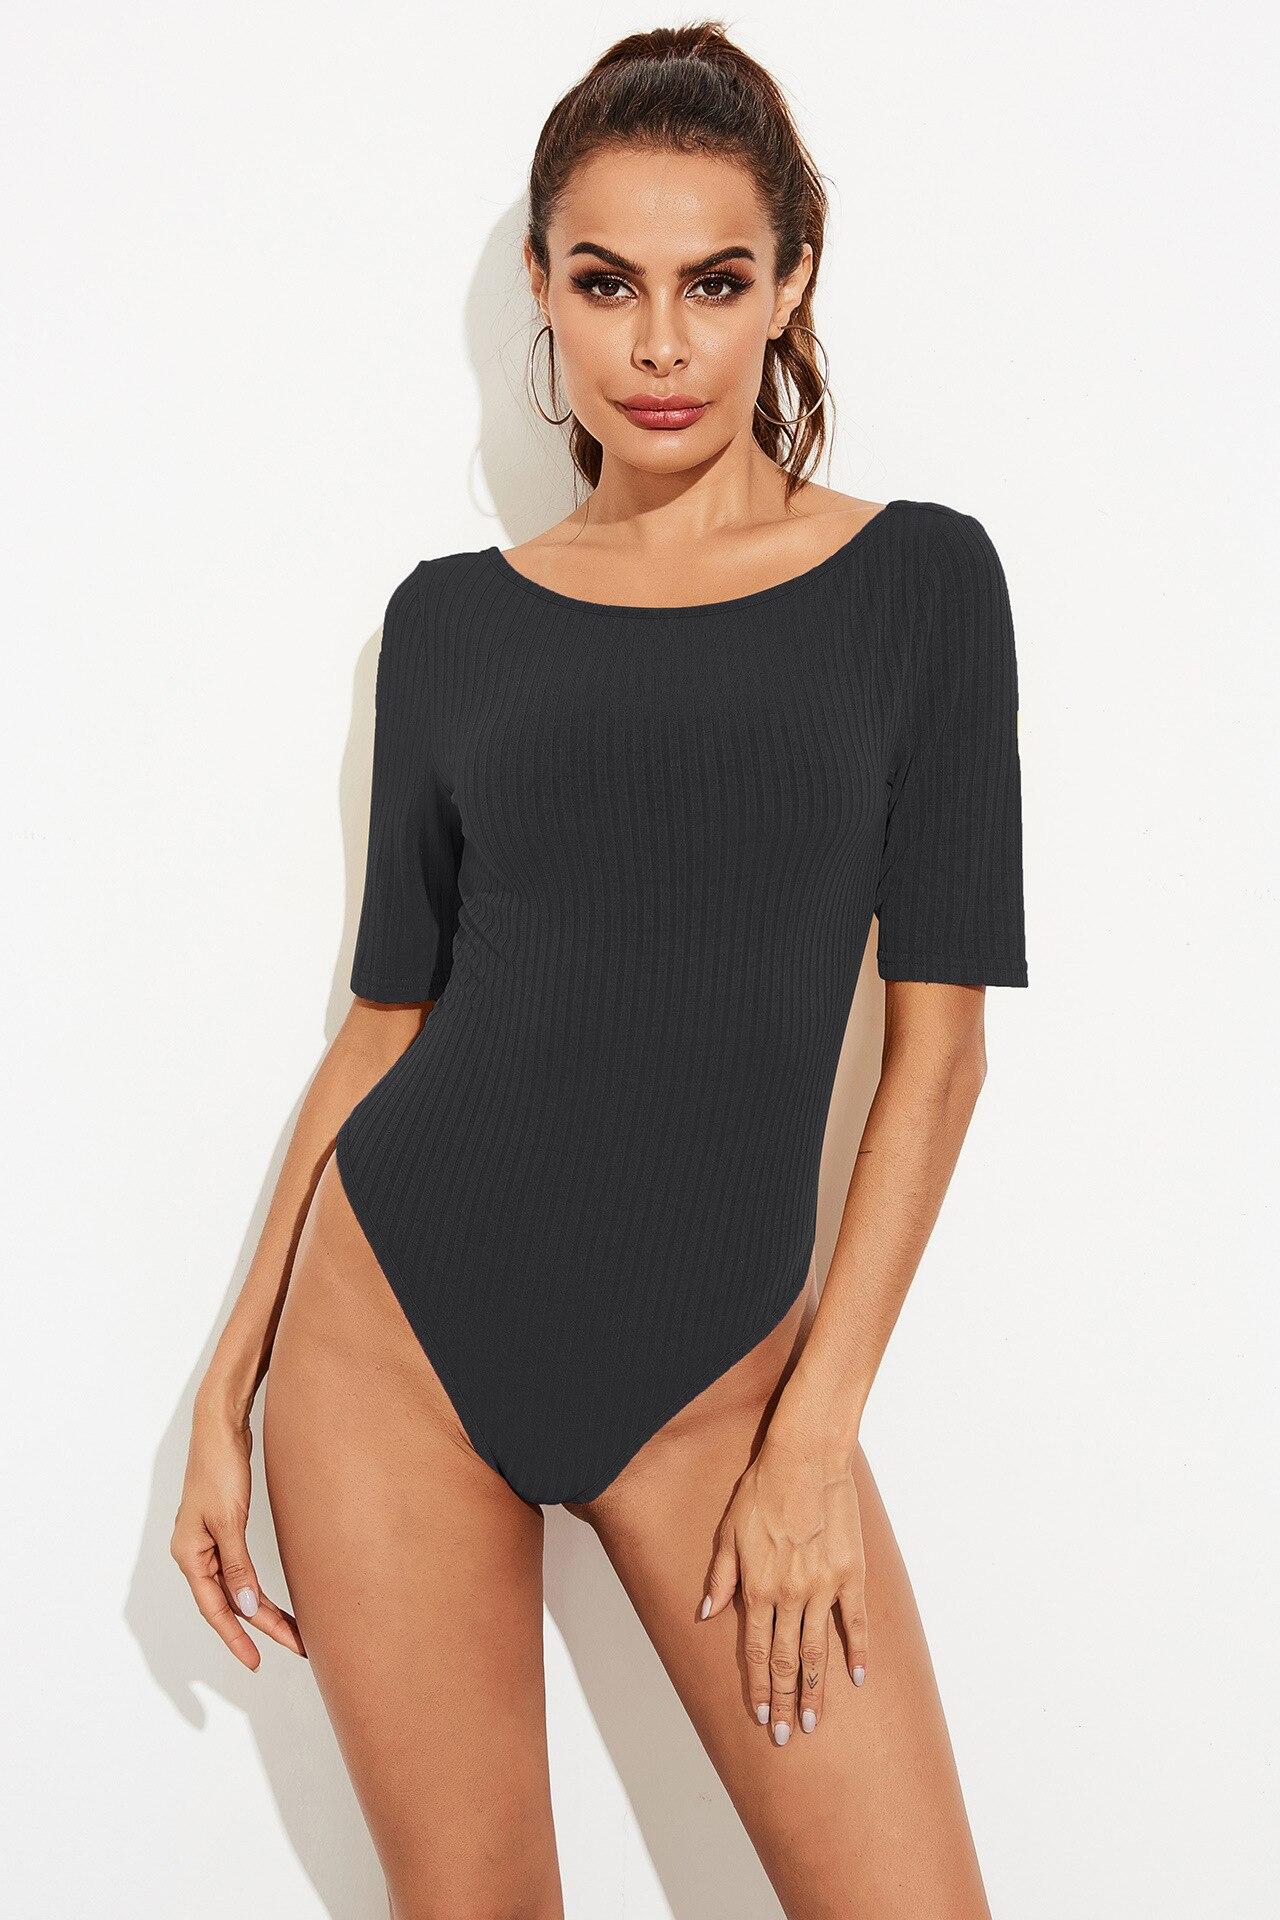 Backless Slim Knit Pit Jumpsuit Round Neck Middle Sleeve Sexy Elastic Tight-fitting Women's Bottoming Shirt Sexy Jumpsuit